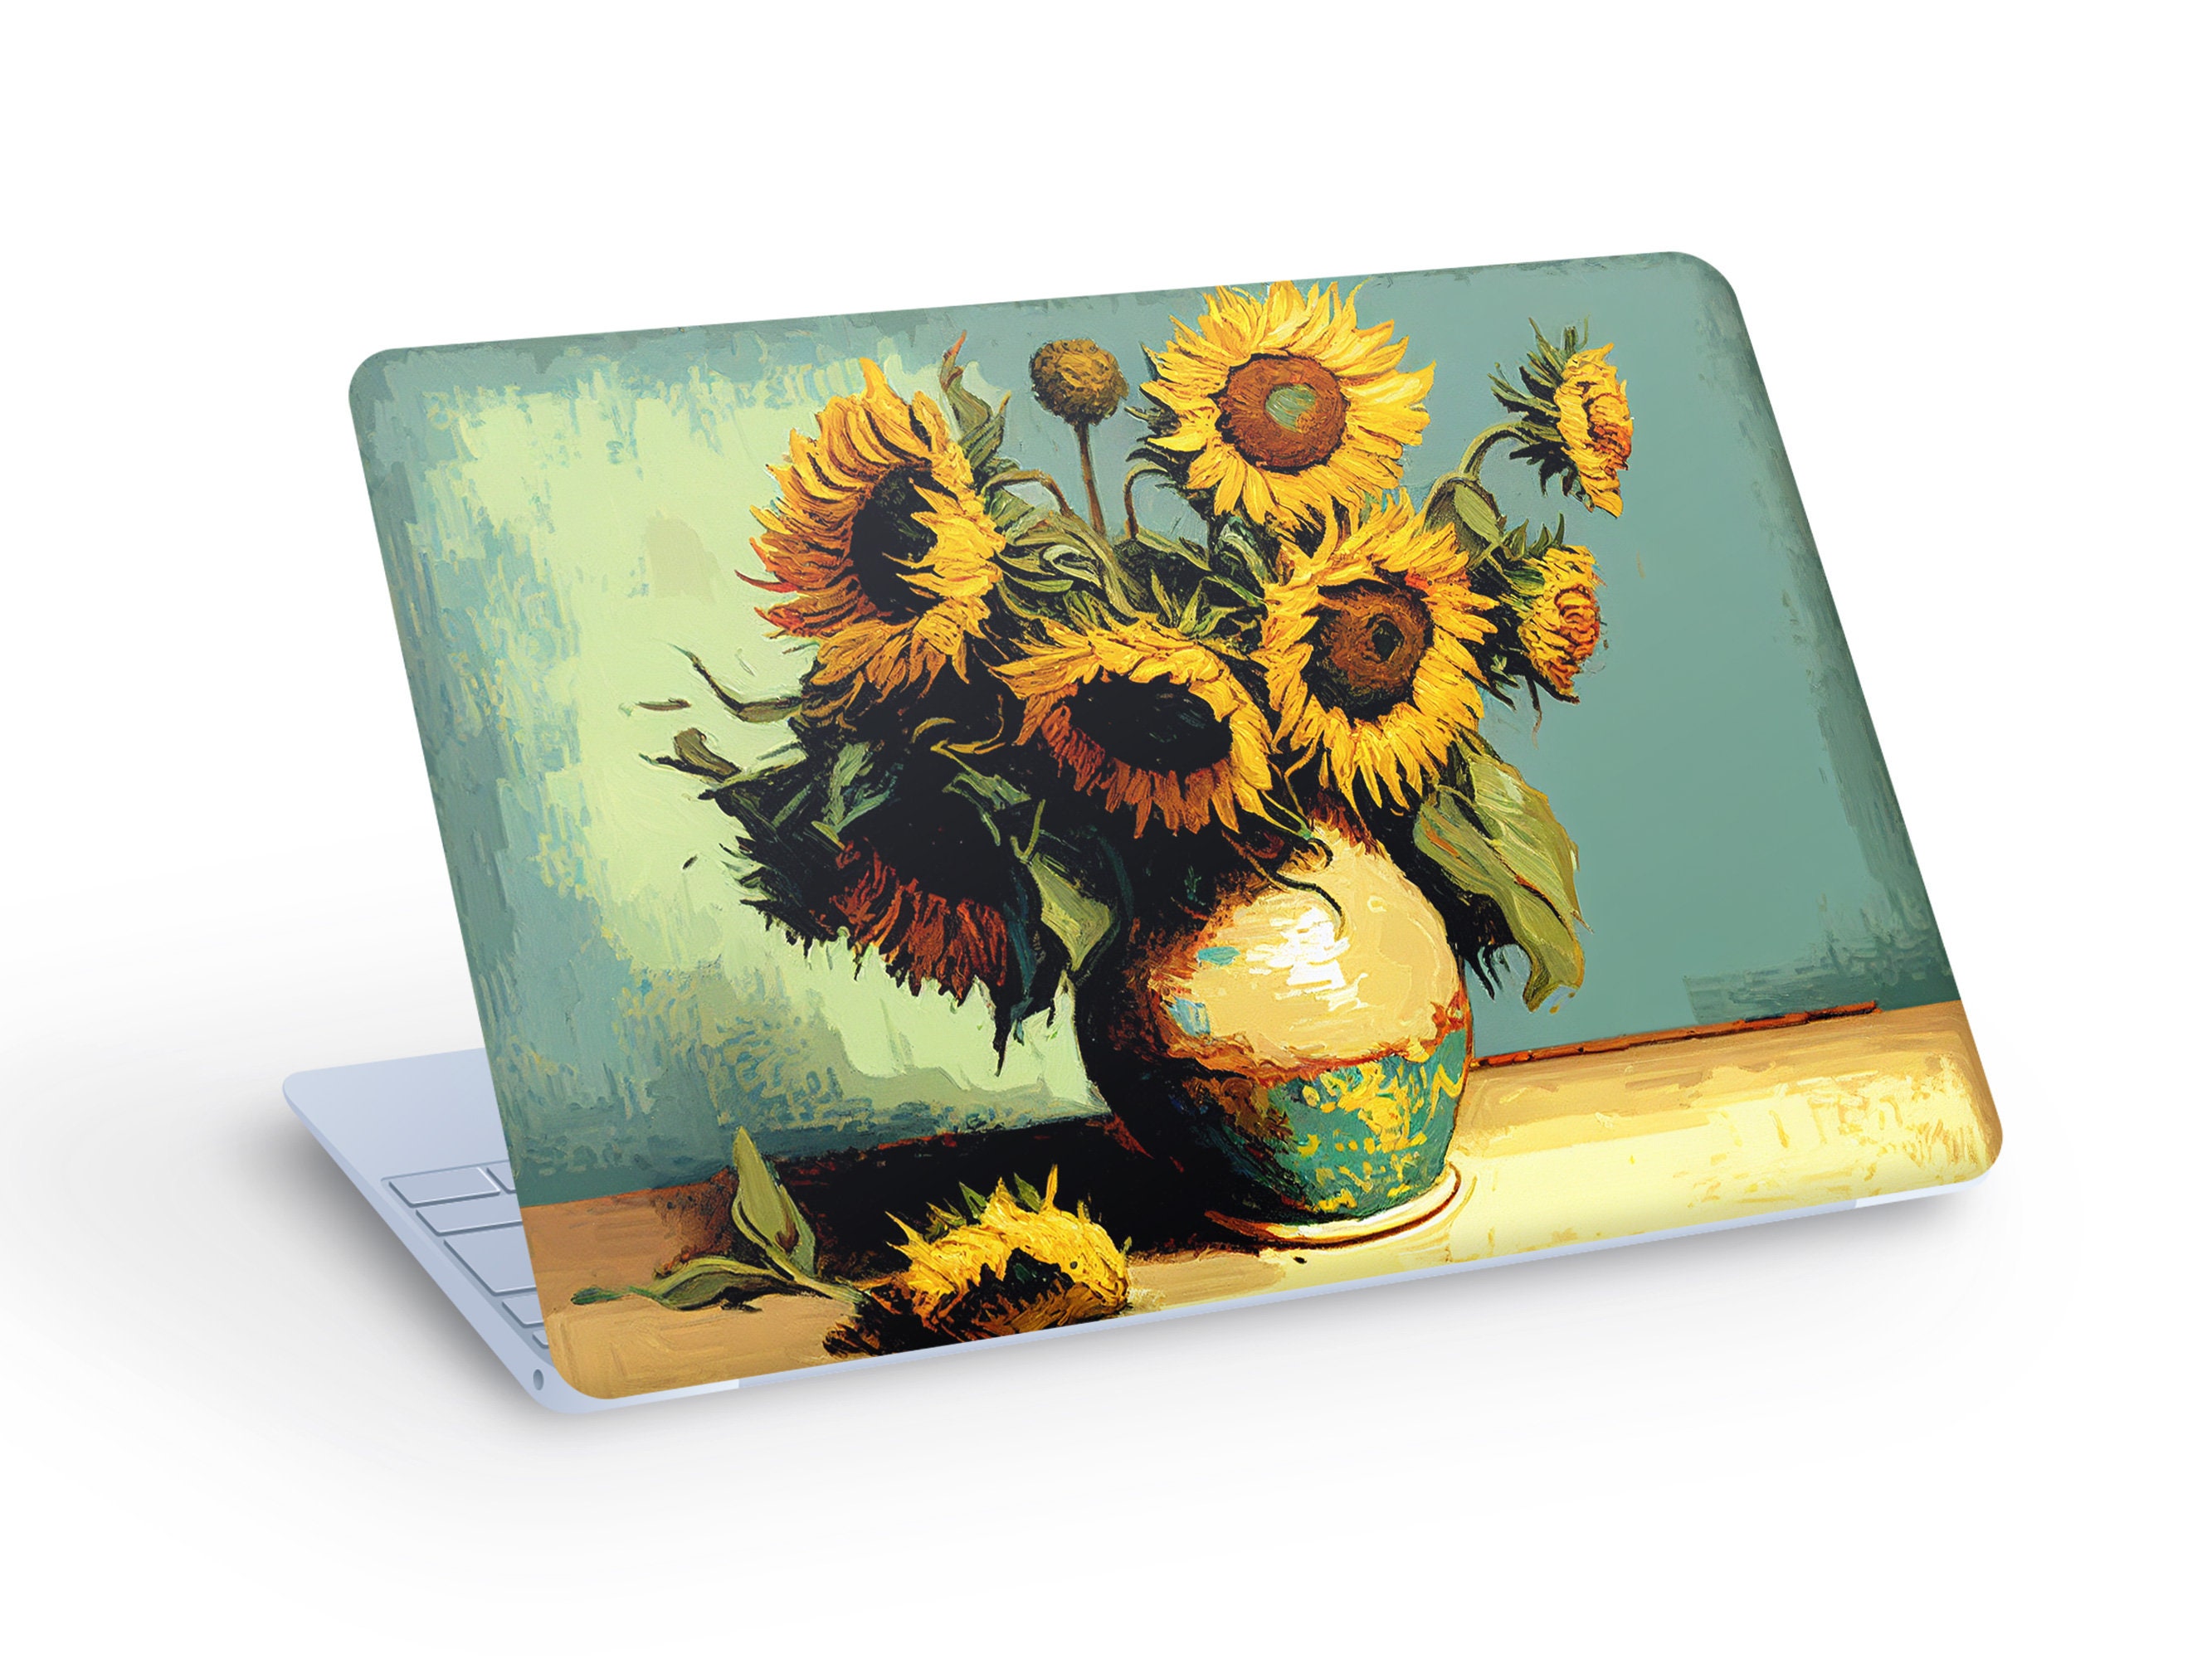 40 Vincent Van Gogh Painting Stickers Cool Sticker Pack 